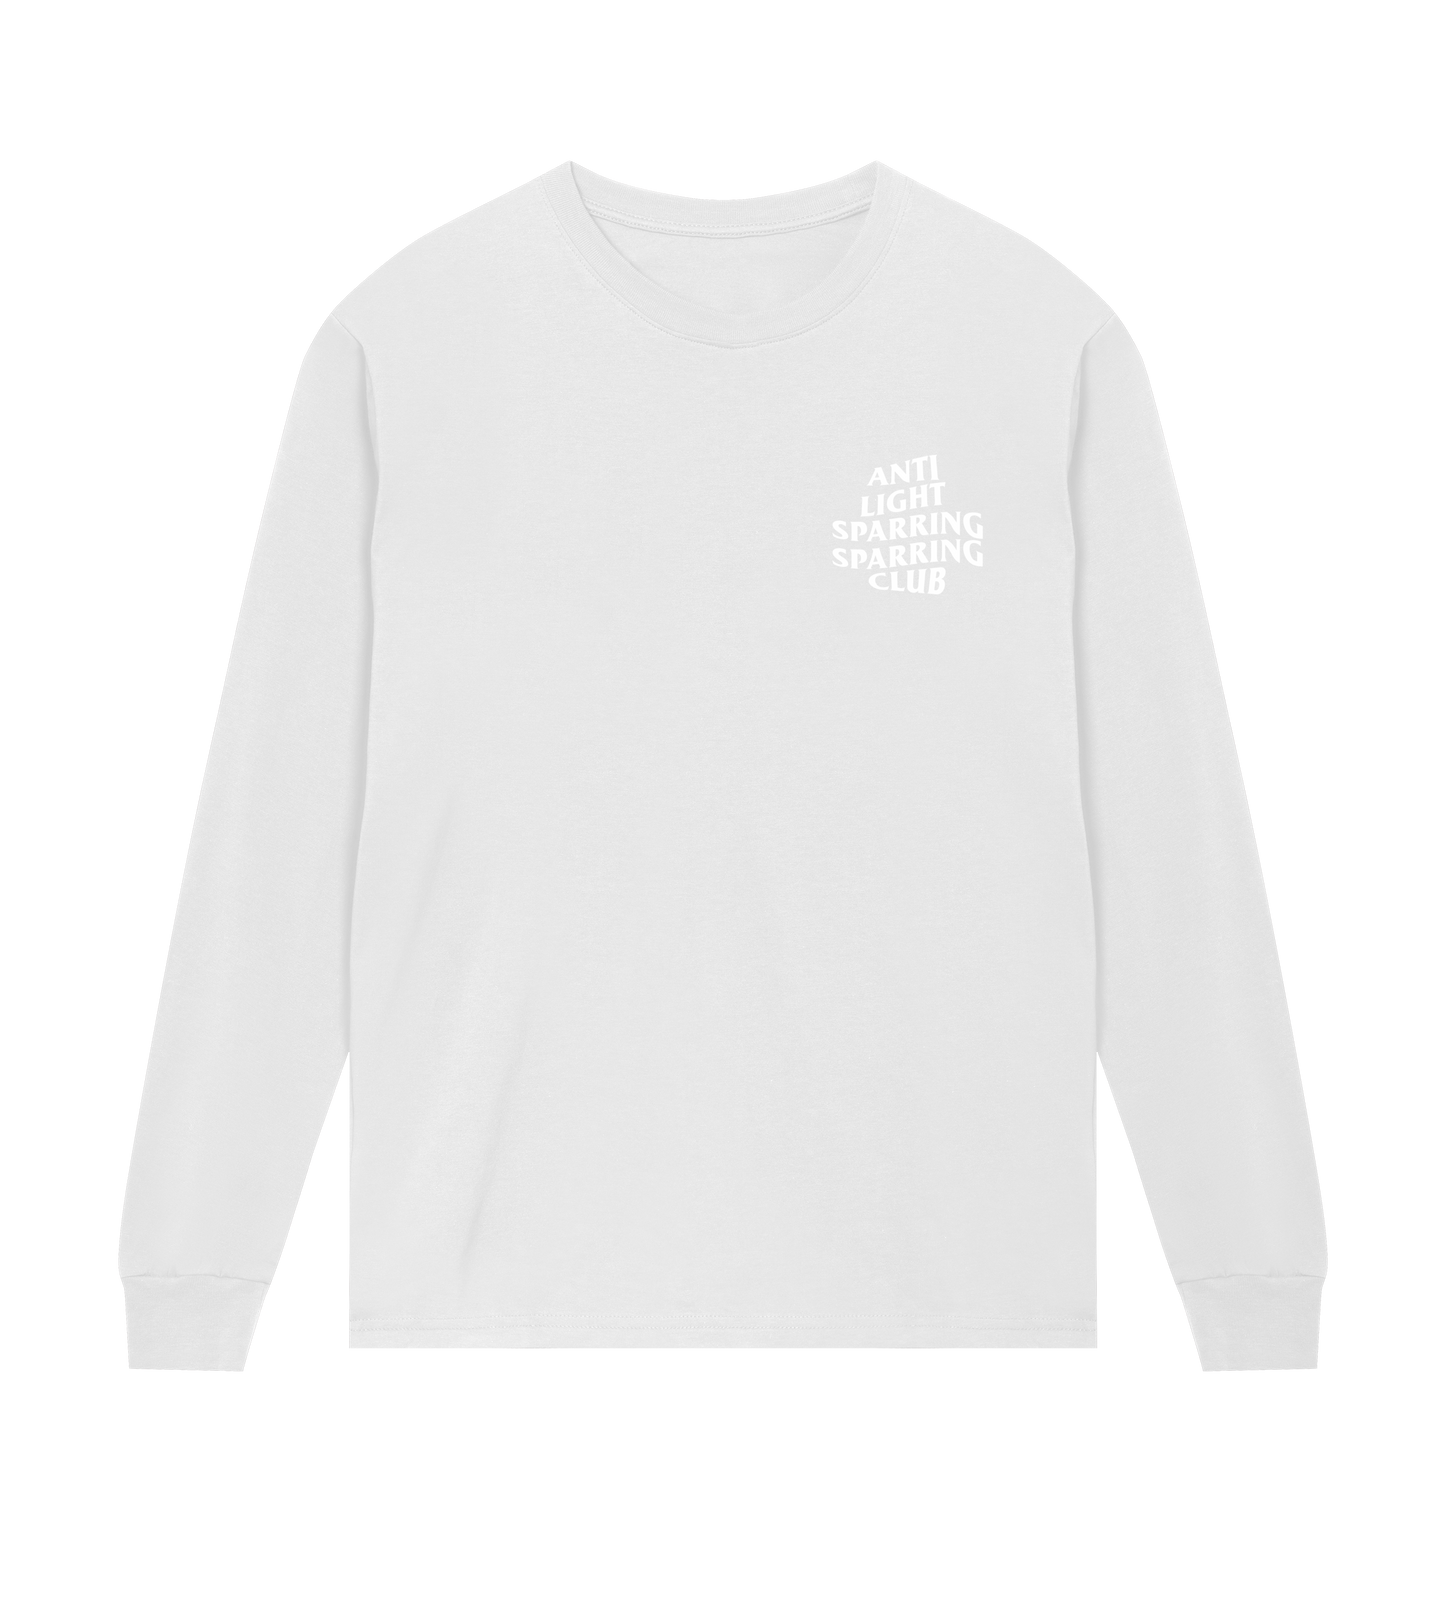 ANTI LIGHT SPARRING SPARRING CLUB 'ESSENTIAL' LONG SLEEVE V2